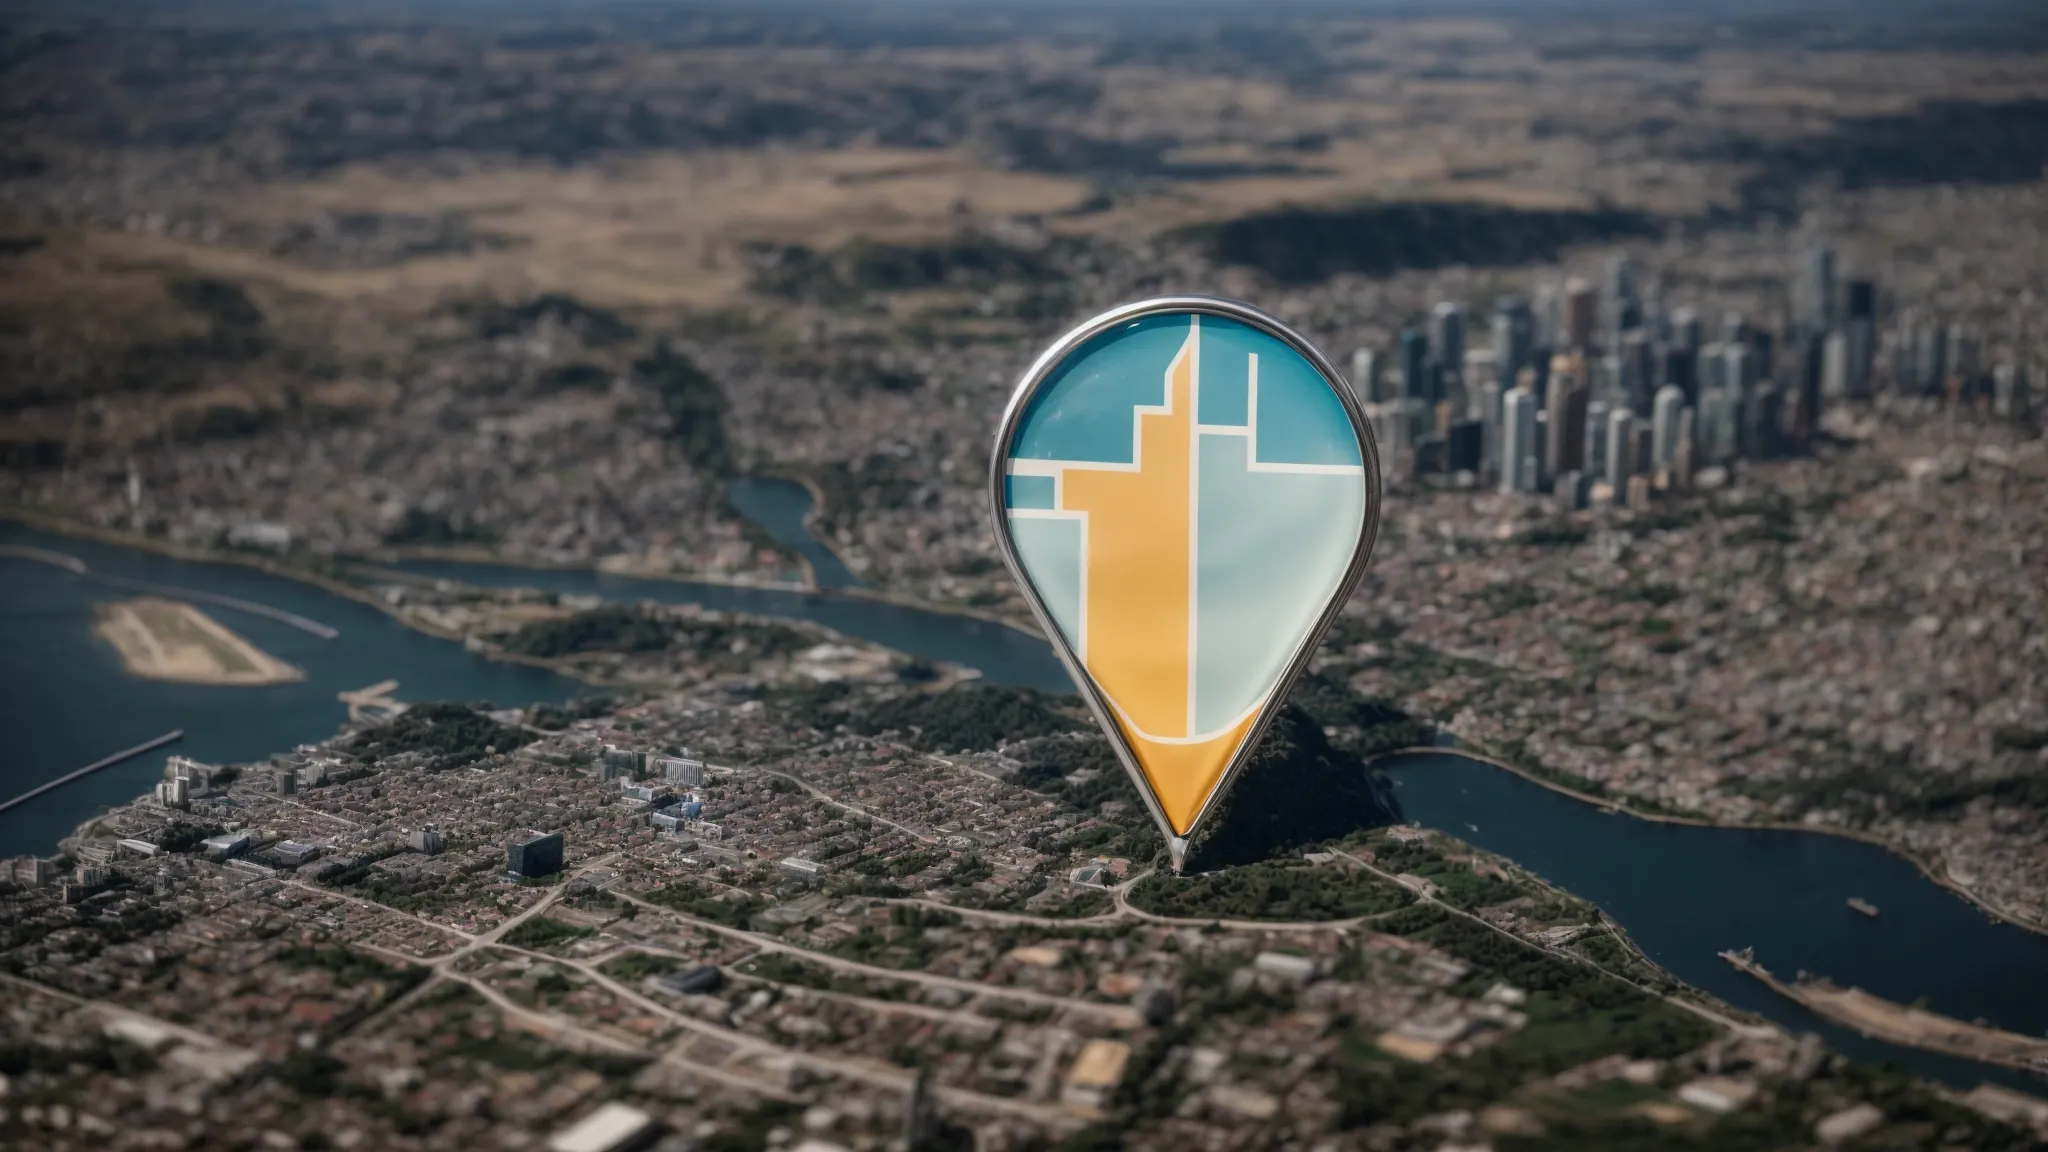 a map pin icon hovering over a simplified graphic of a city skyline.